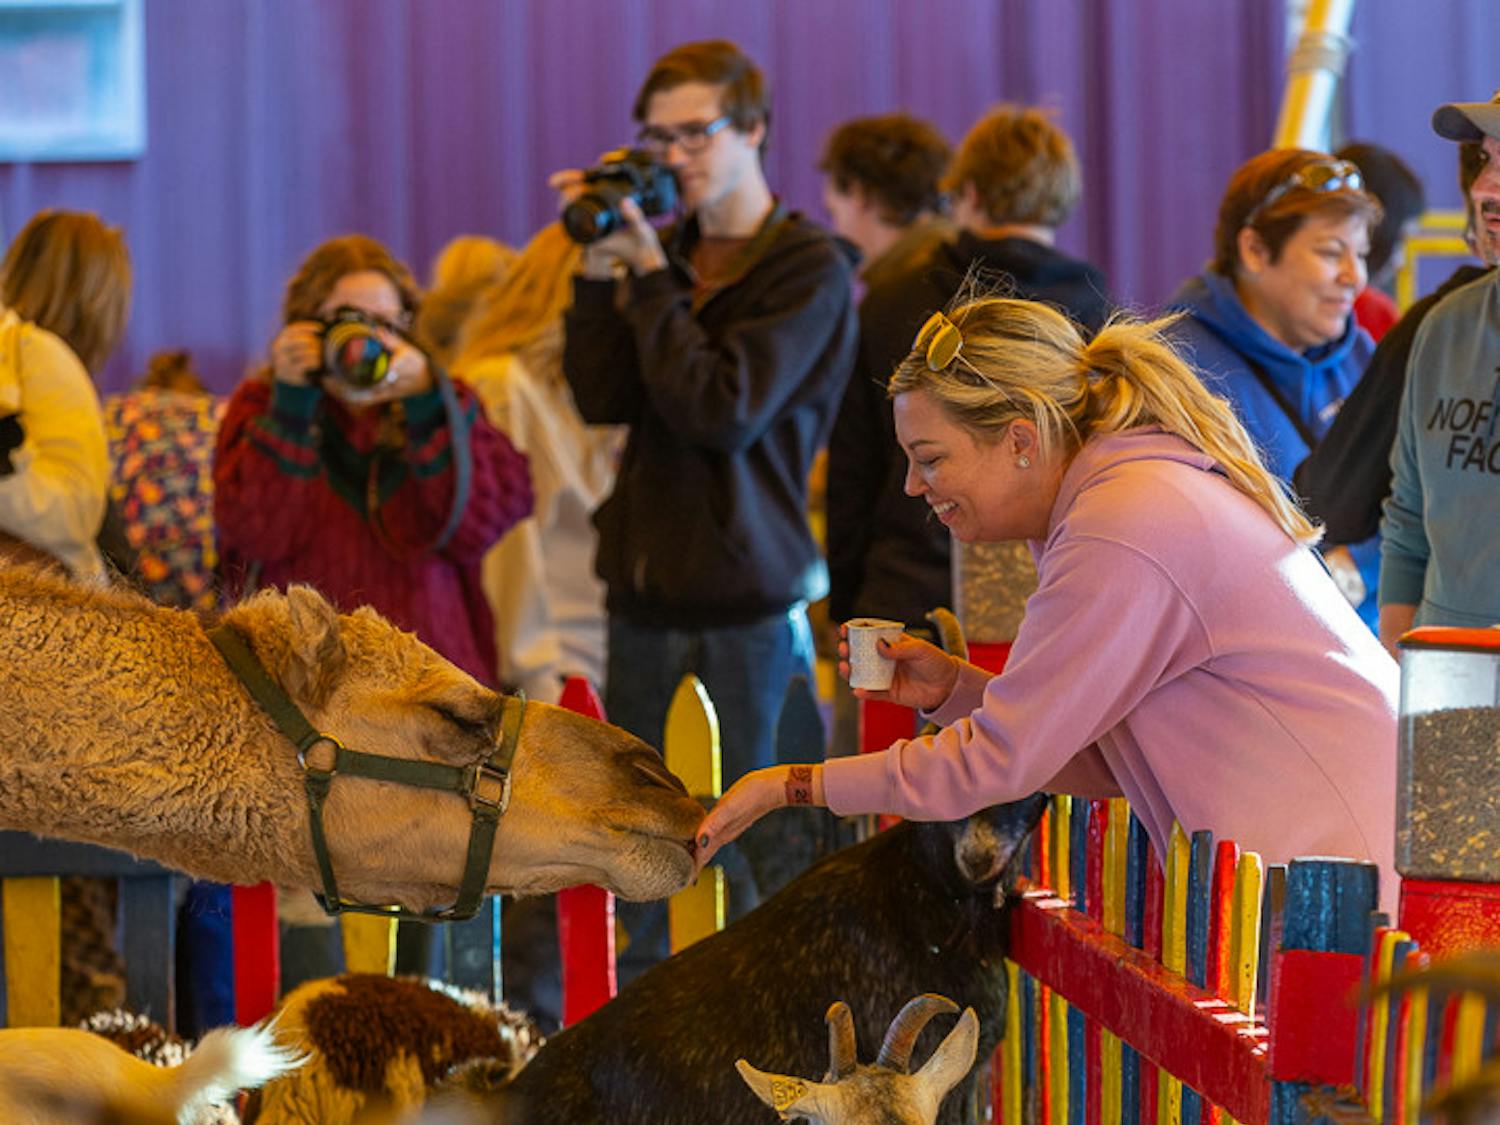 Brittany Burnett, a 39-year-old Lexington resident, feeds one of the camels at the South Carolina State Fair petting zoo on Oct. 18, 2022. The S.C. State Fair petting zoo is a popular attraction for animal lovers, small children and several other members of the Columbia community.